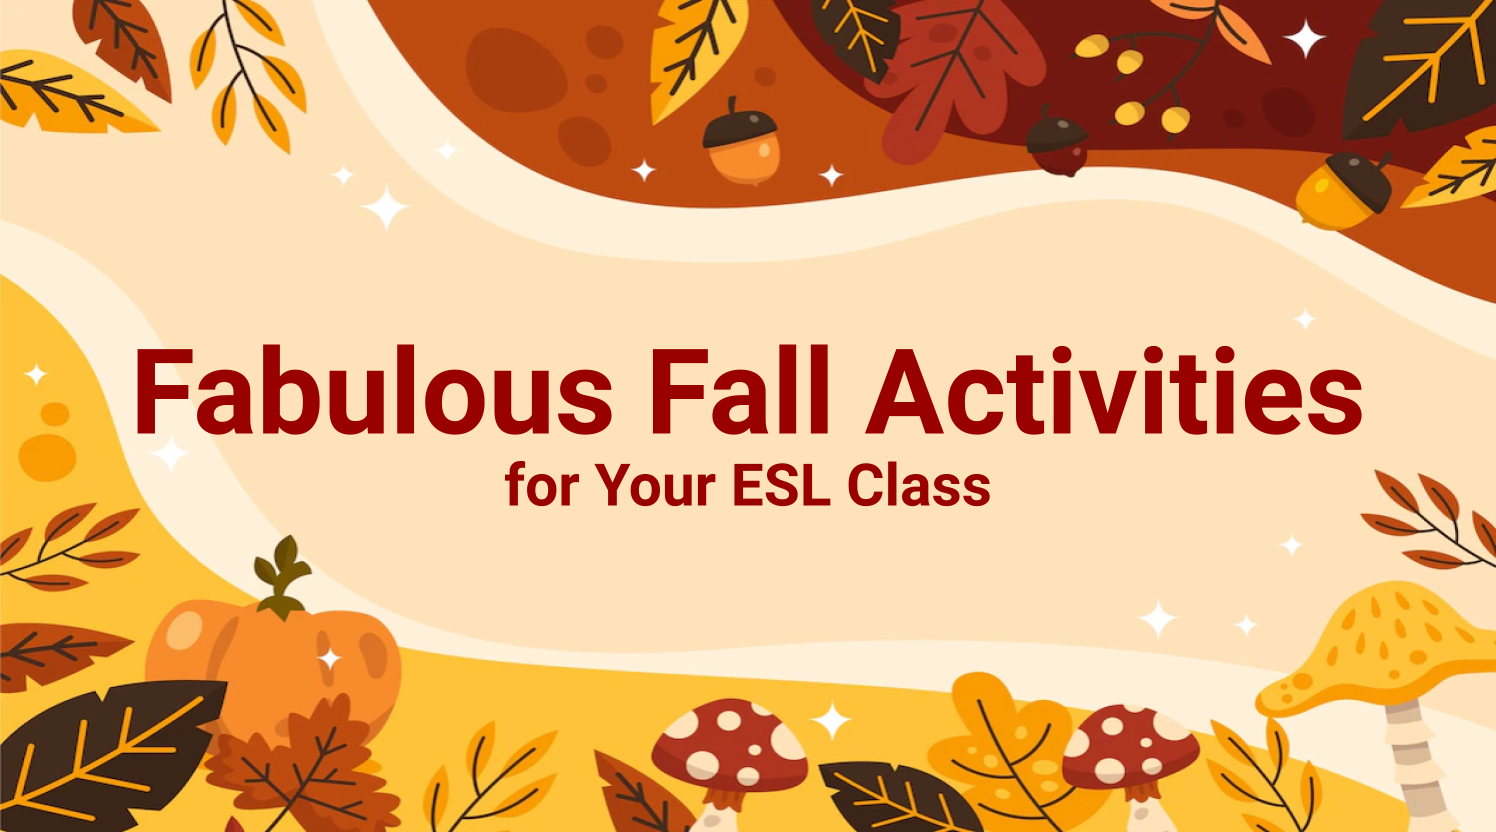 Fabulous Fall Activities for the ESL Class